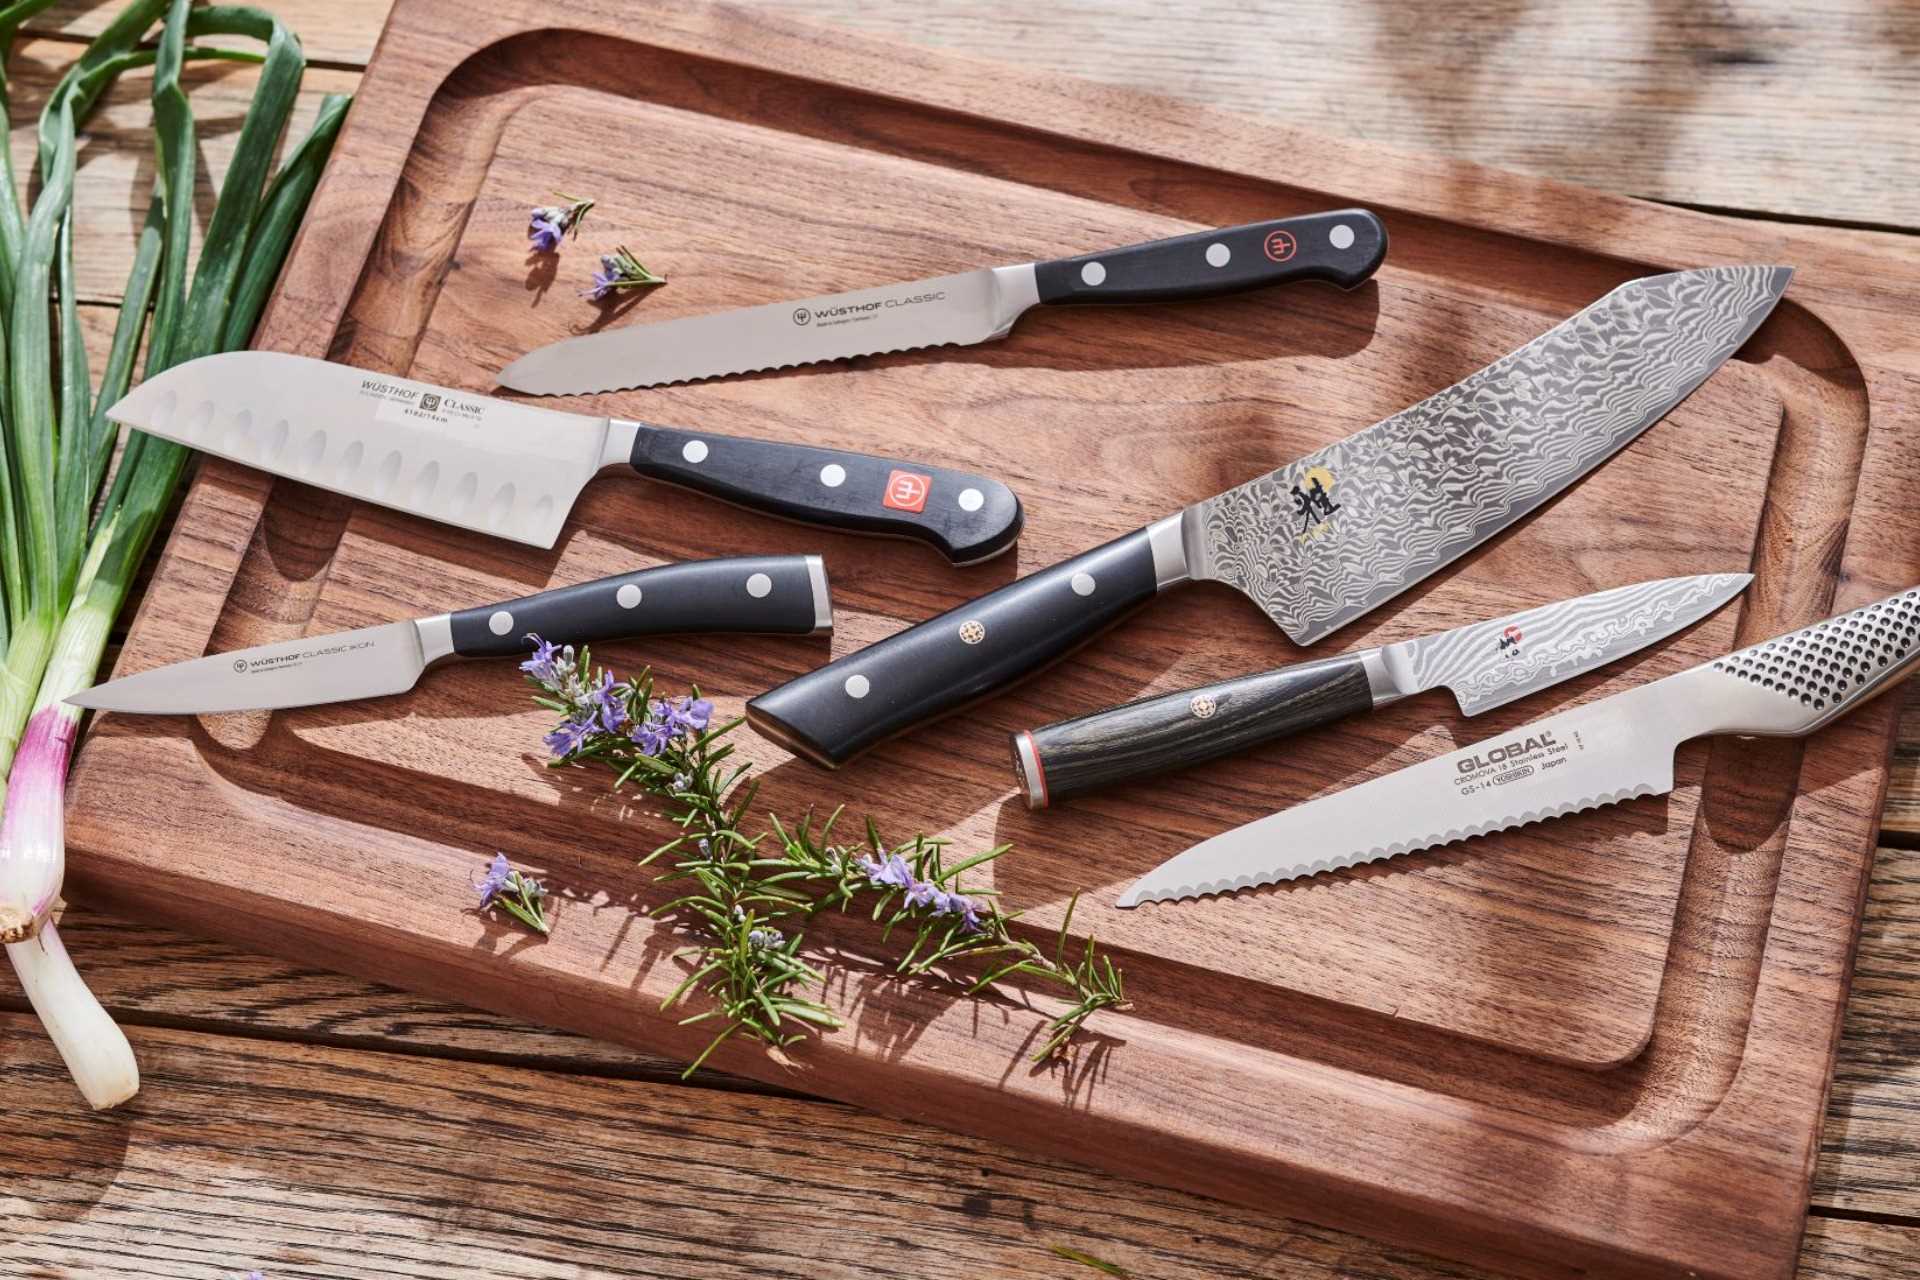 How To Choose the Best Knife for Your Kitchen